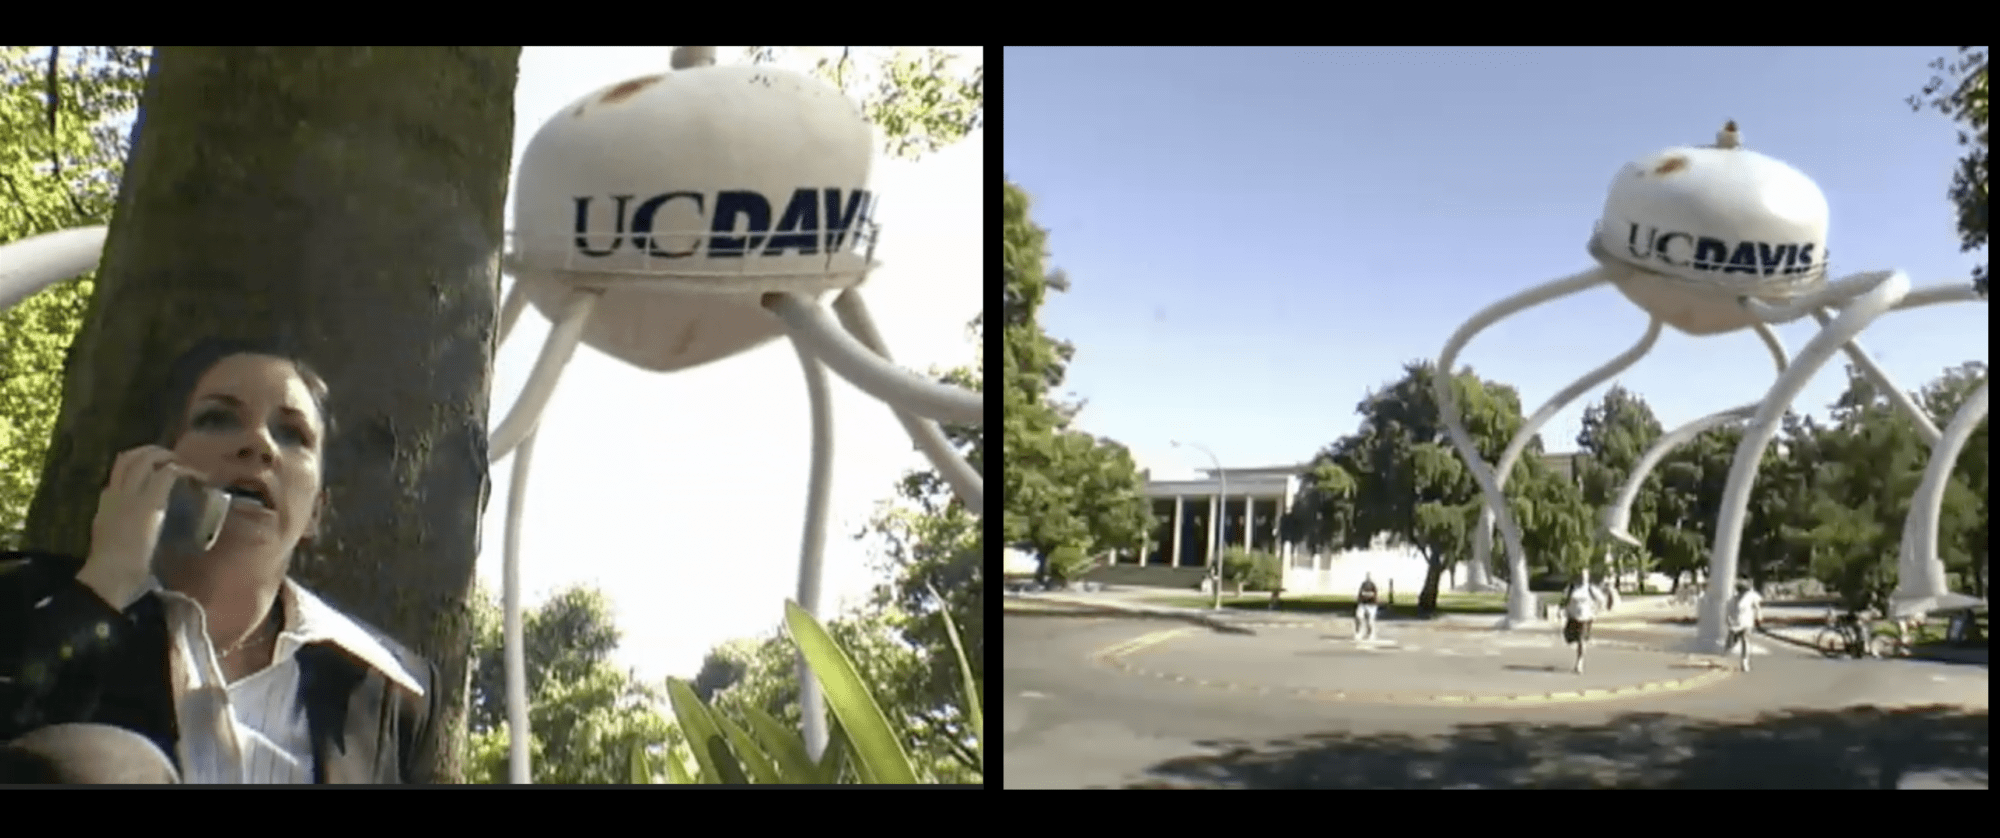 Two still images from student film featuring water towers